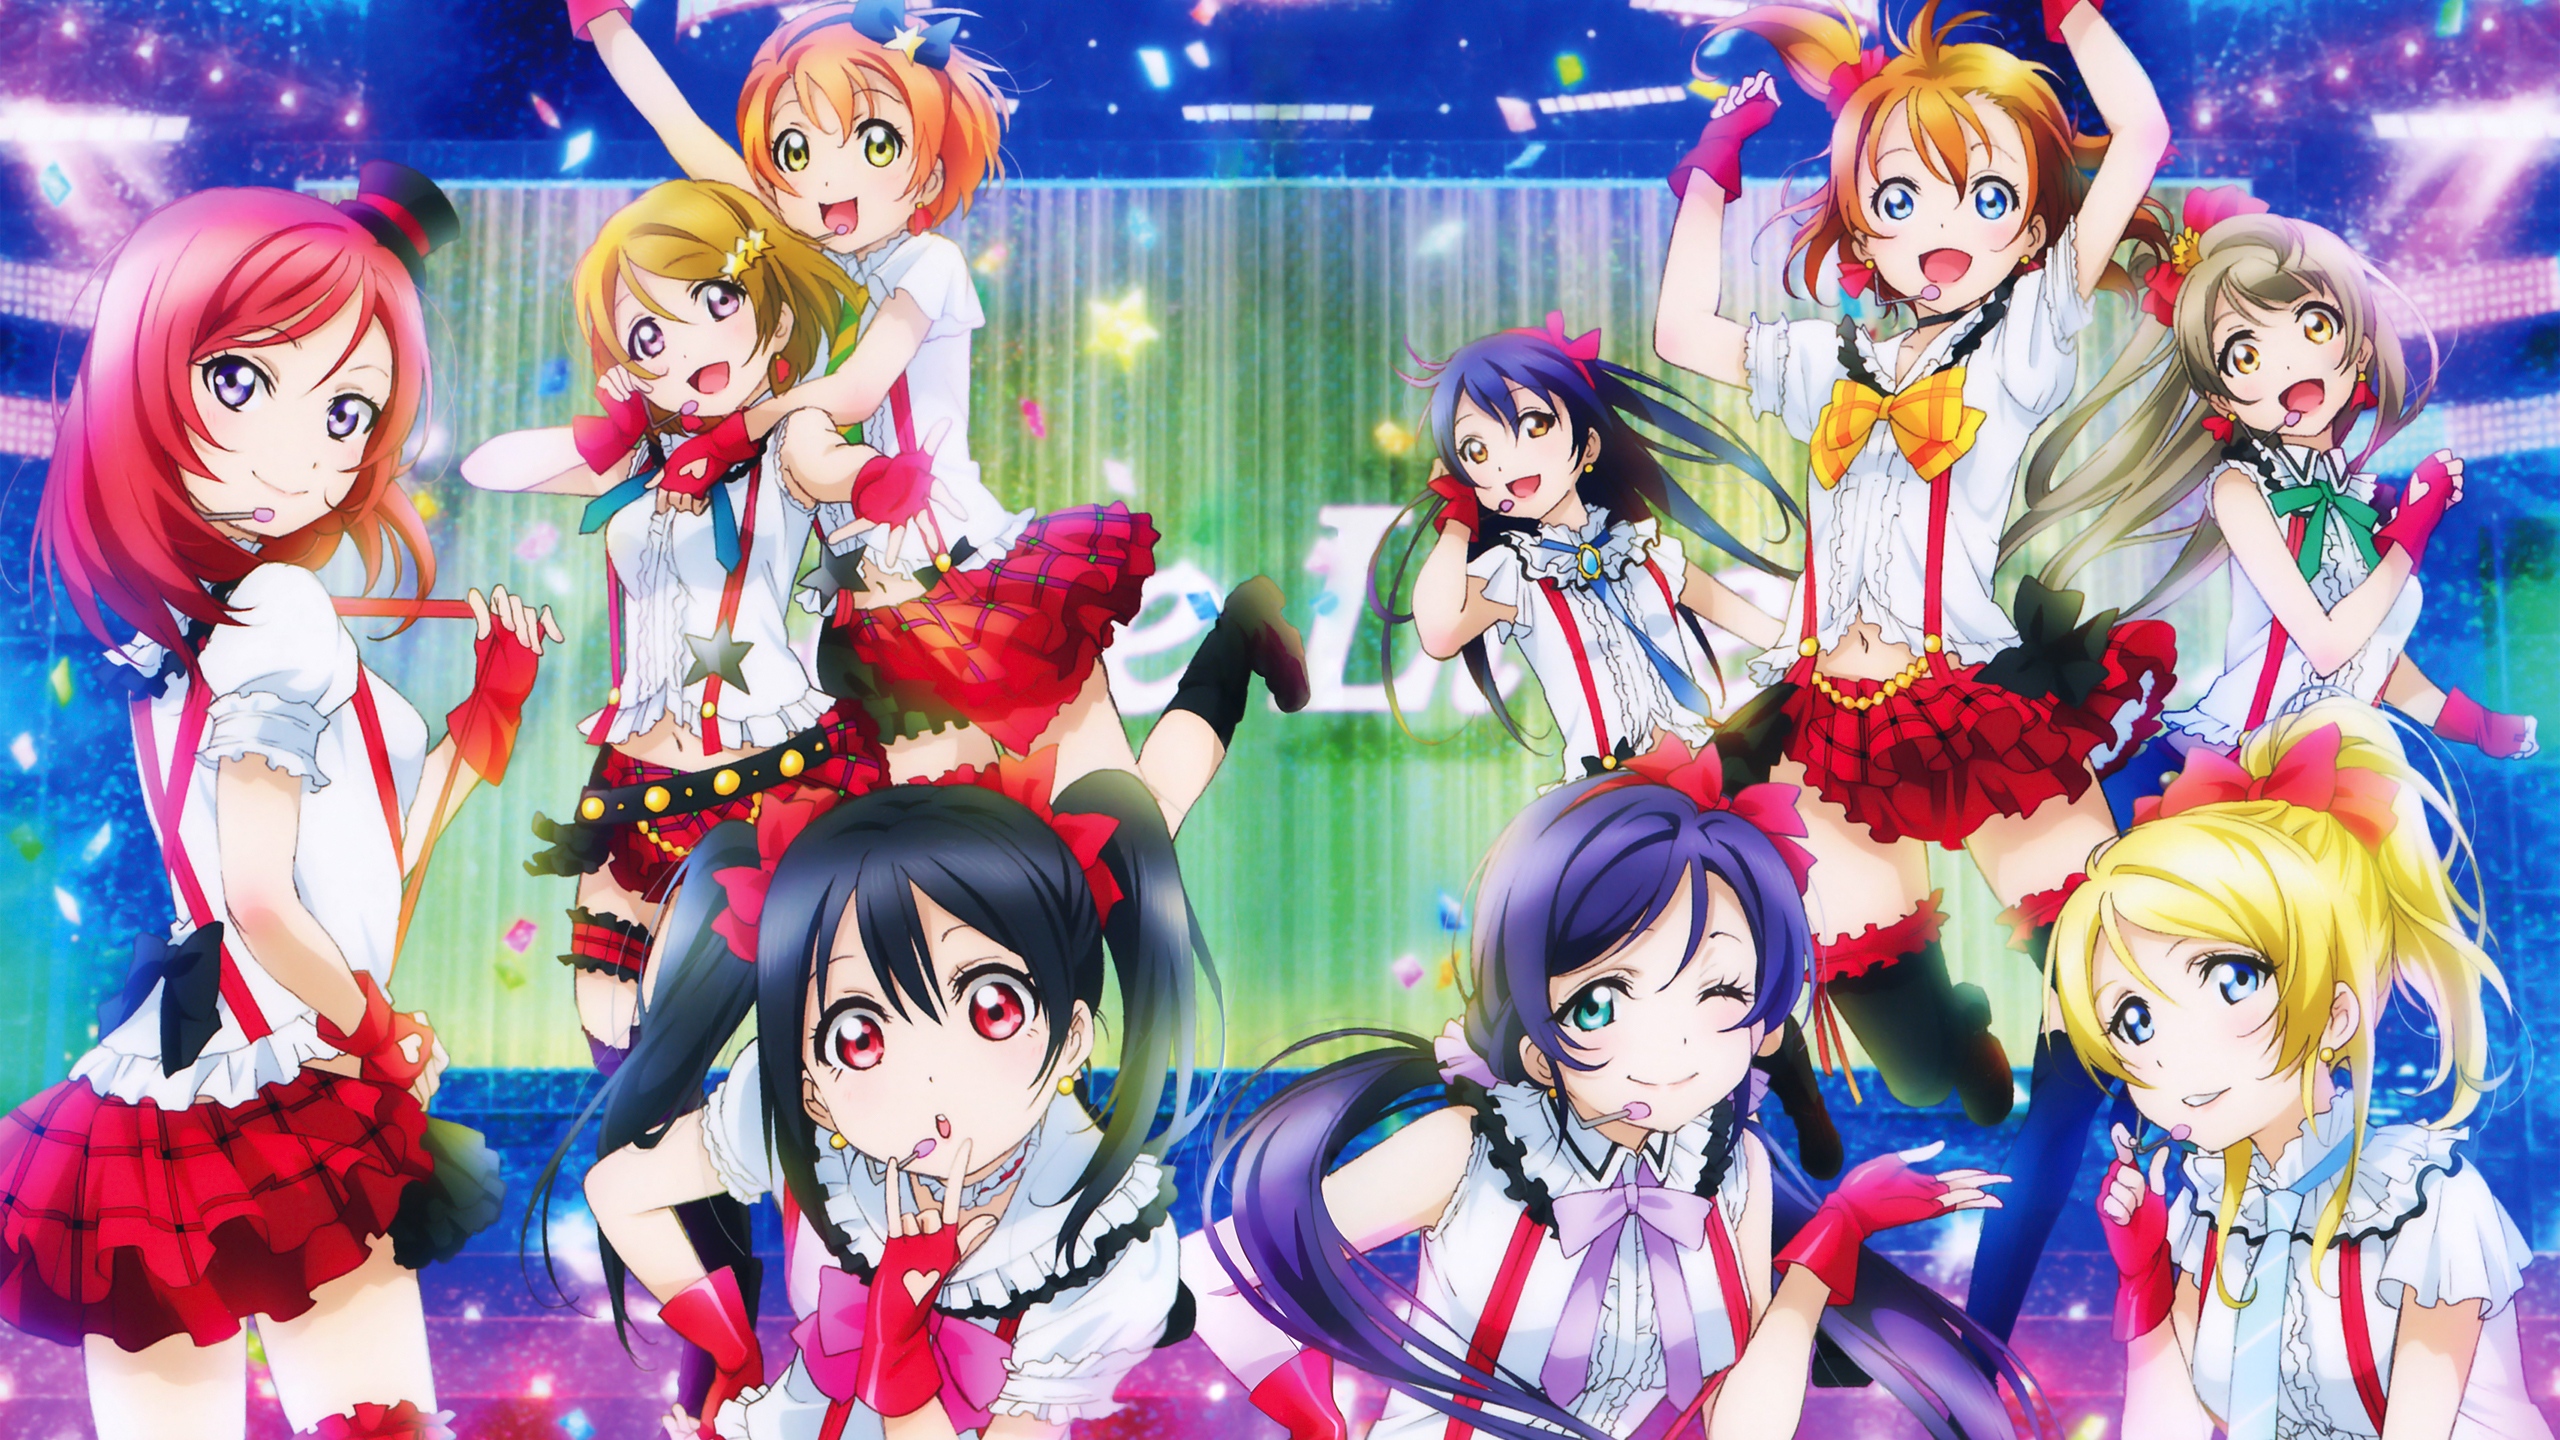 Love Live! Wallpapers